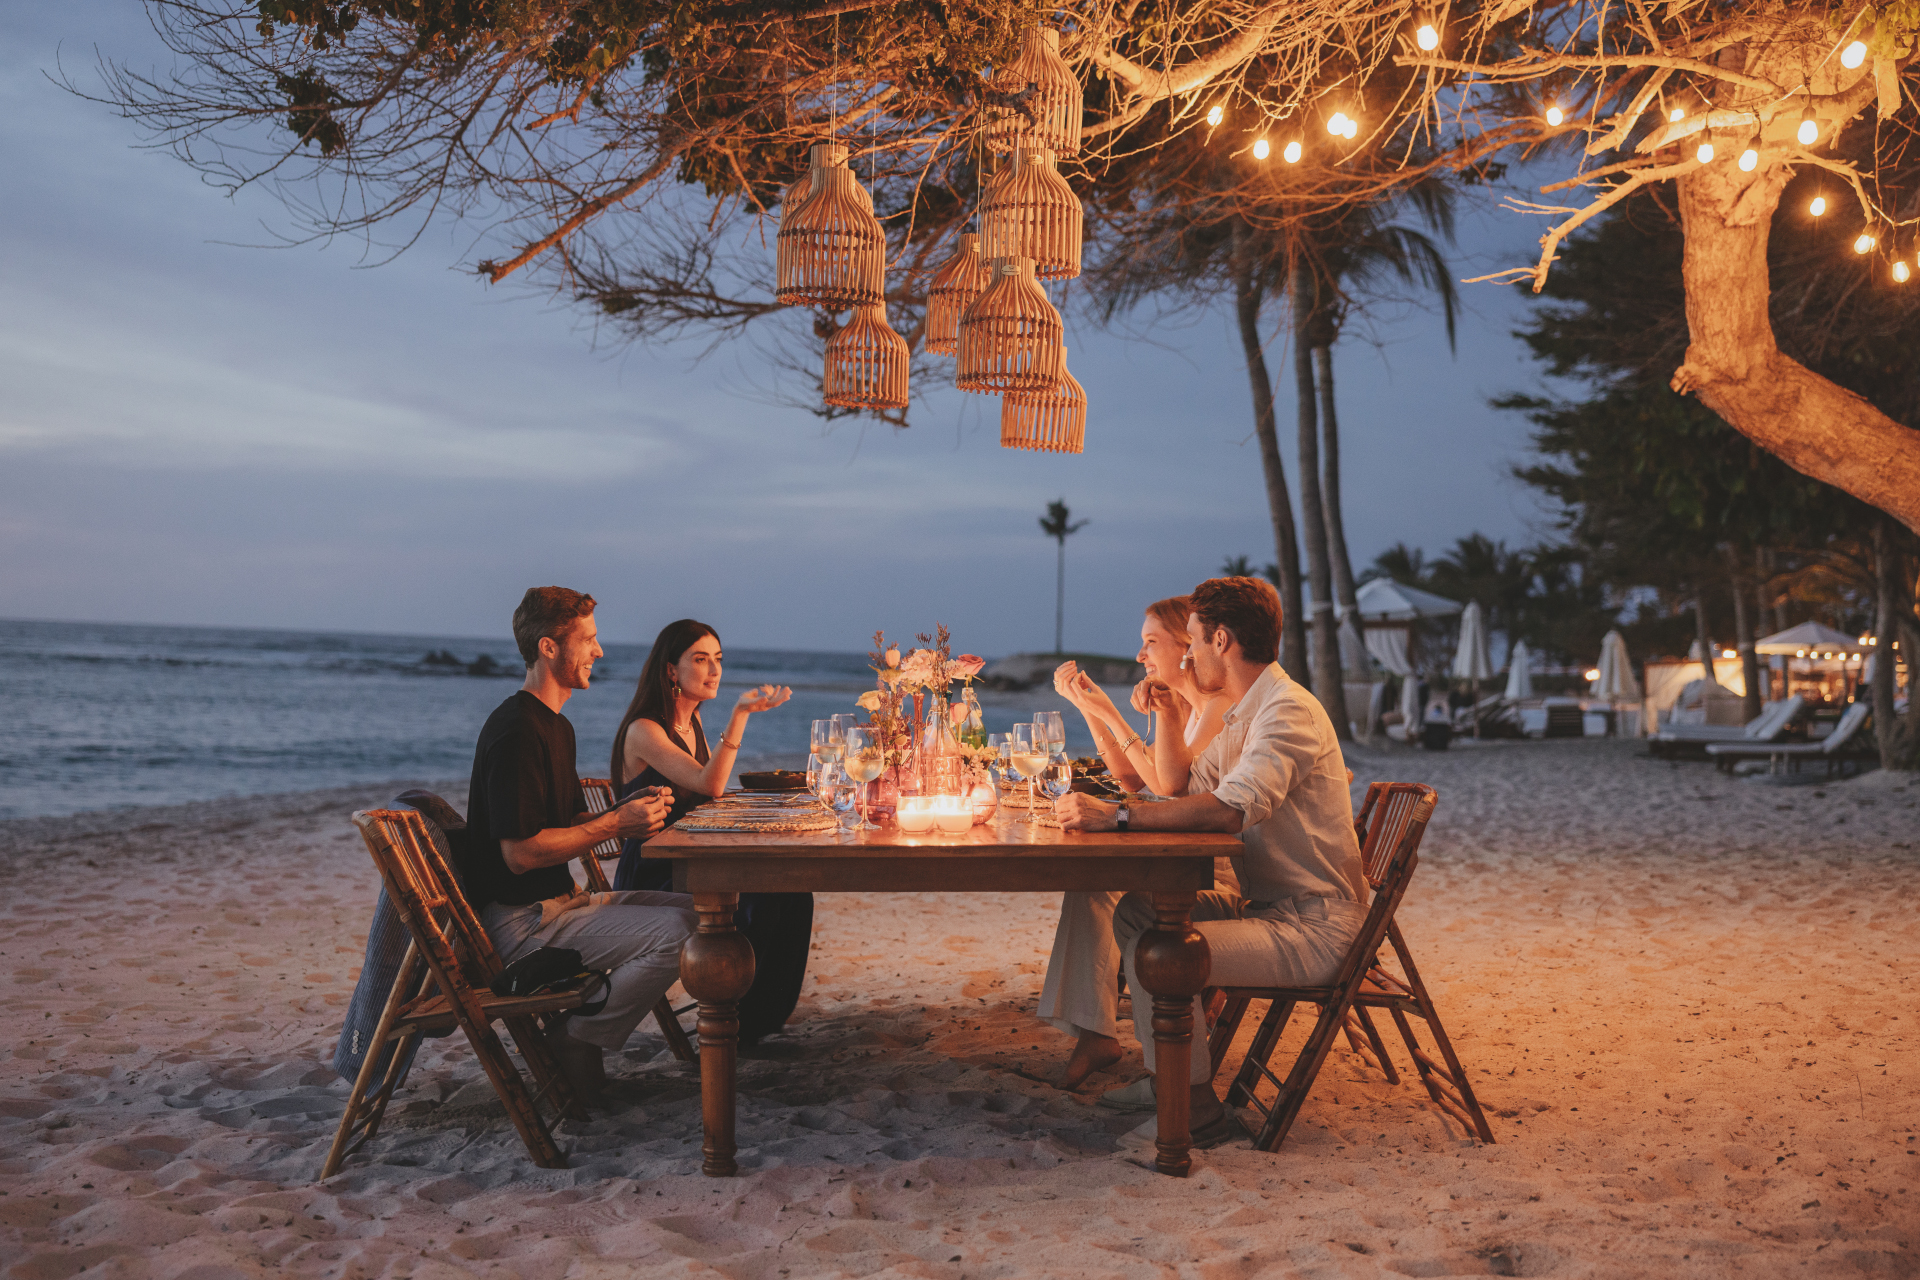 People sat at dining table on beach at sunset